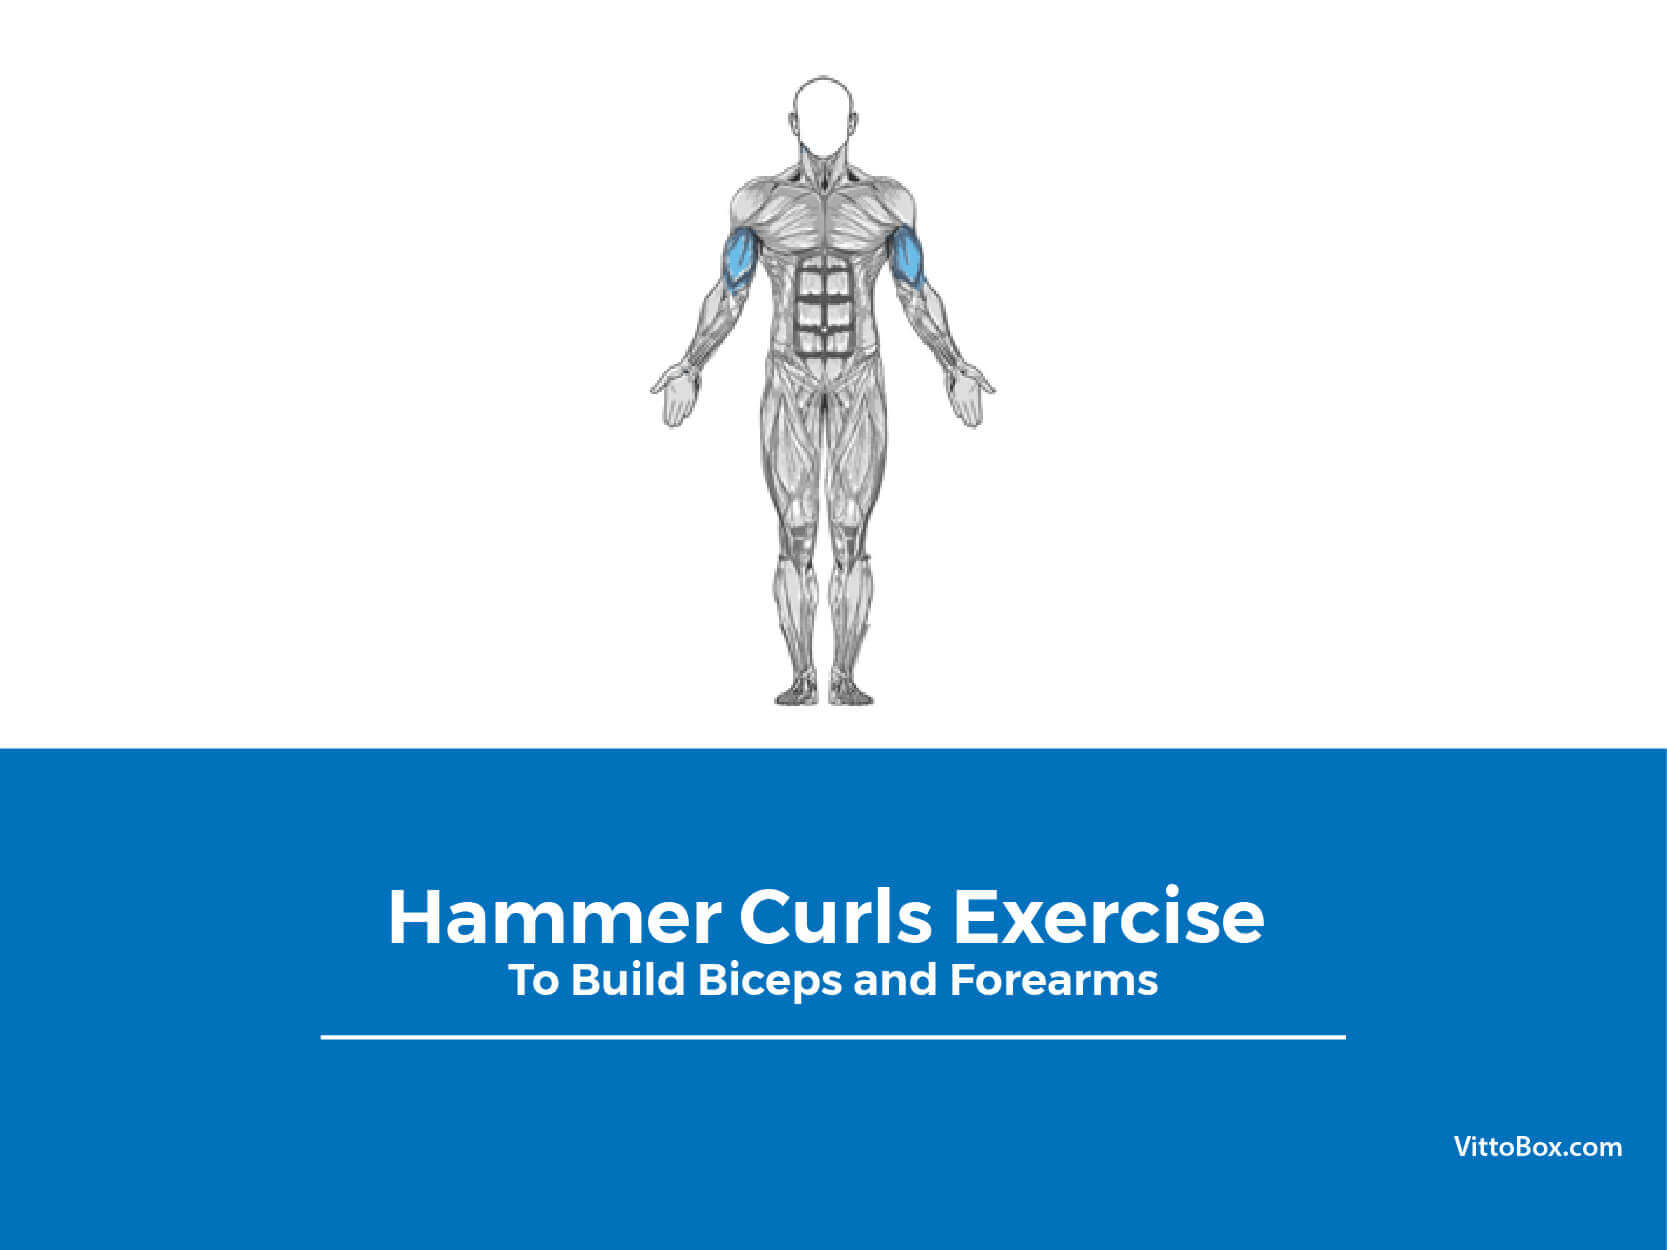 Hammer Curls Exercise To Build Biceps And Forearms